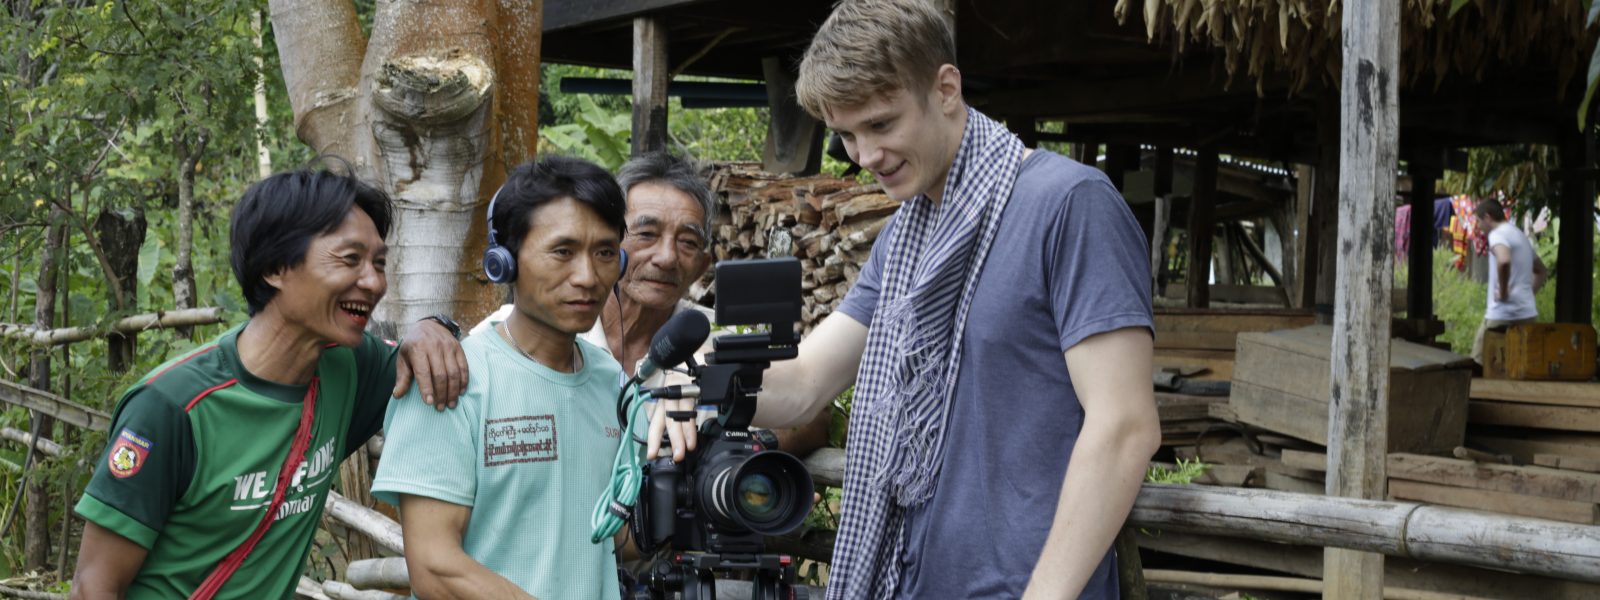 Luke Radcliff and Myanmar men play with professional camera